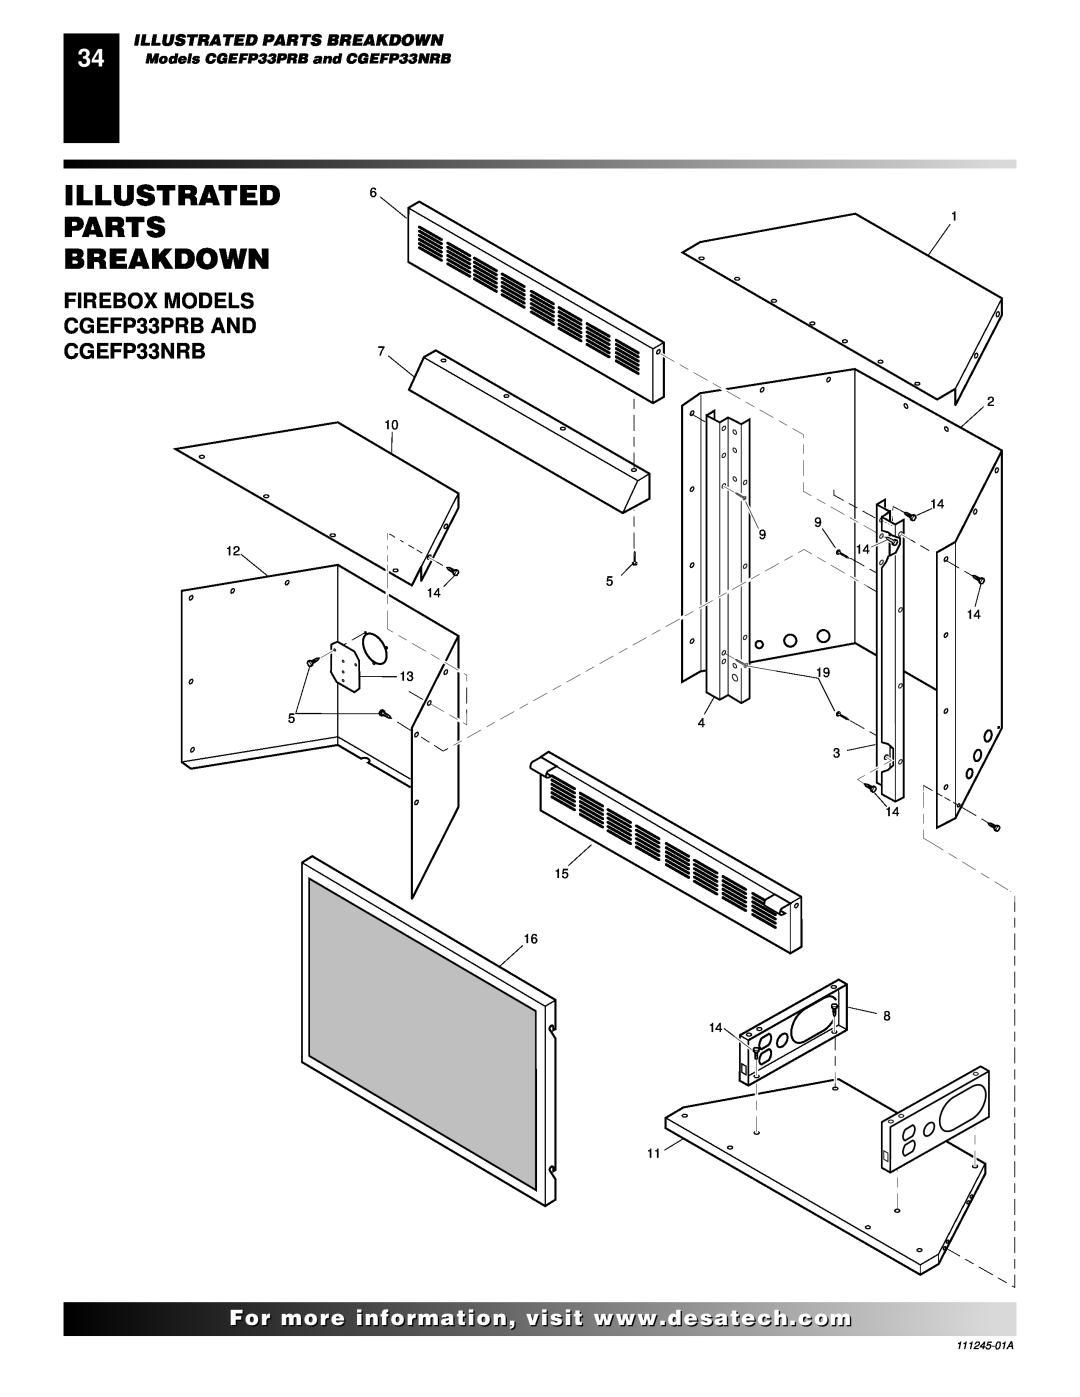 Desa installation manual Illustrated Parts Breakdown, Models CGEFP33PRB and CGEFP33NRB, 111245-01A 